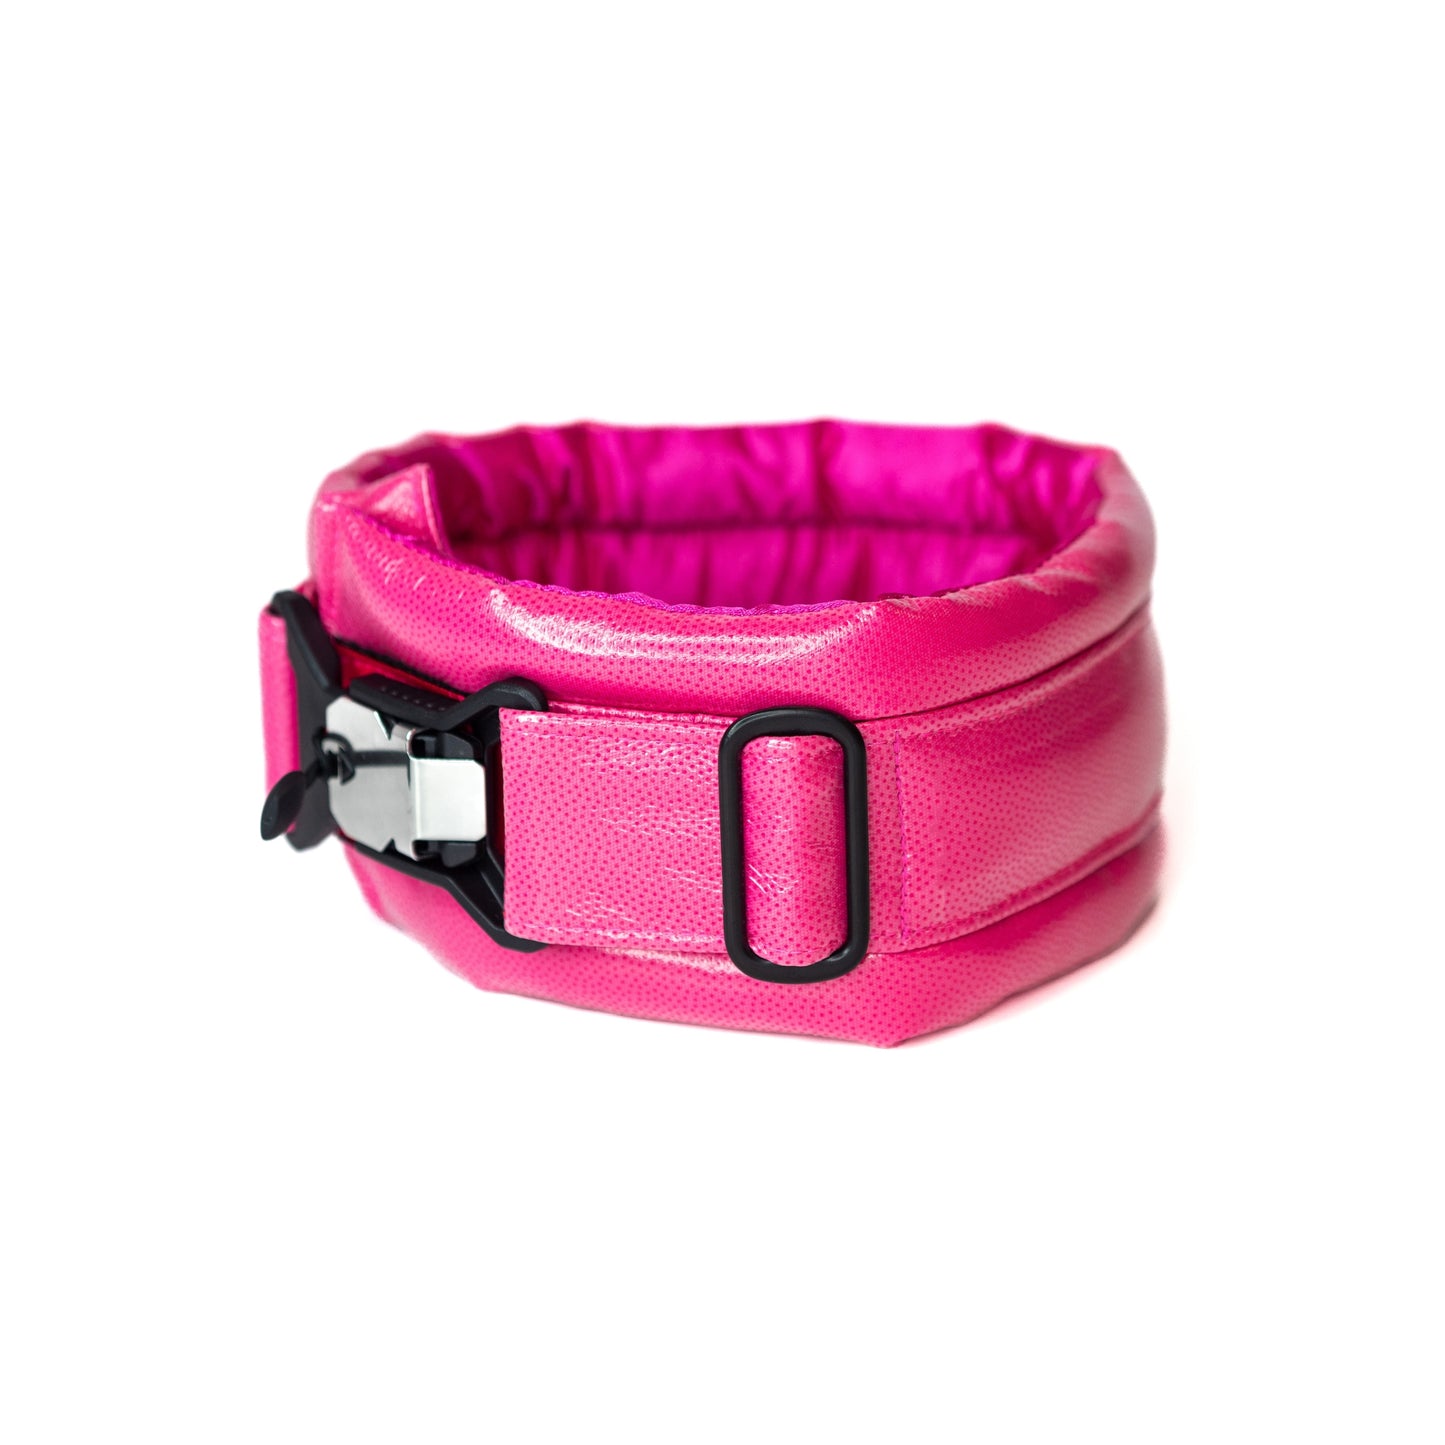 Standard Fluffy Magnetic Collar Eco Leather Malibu Stacy